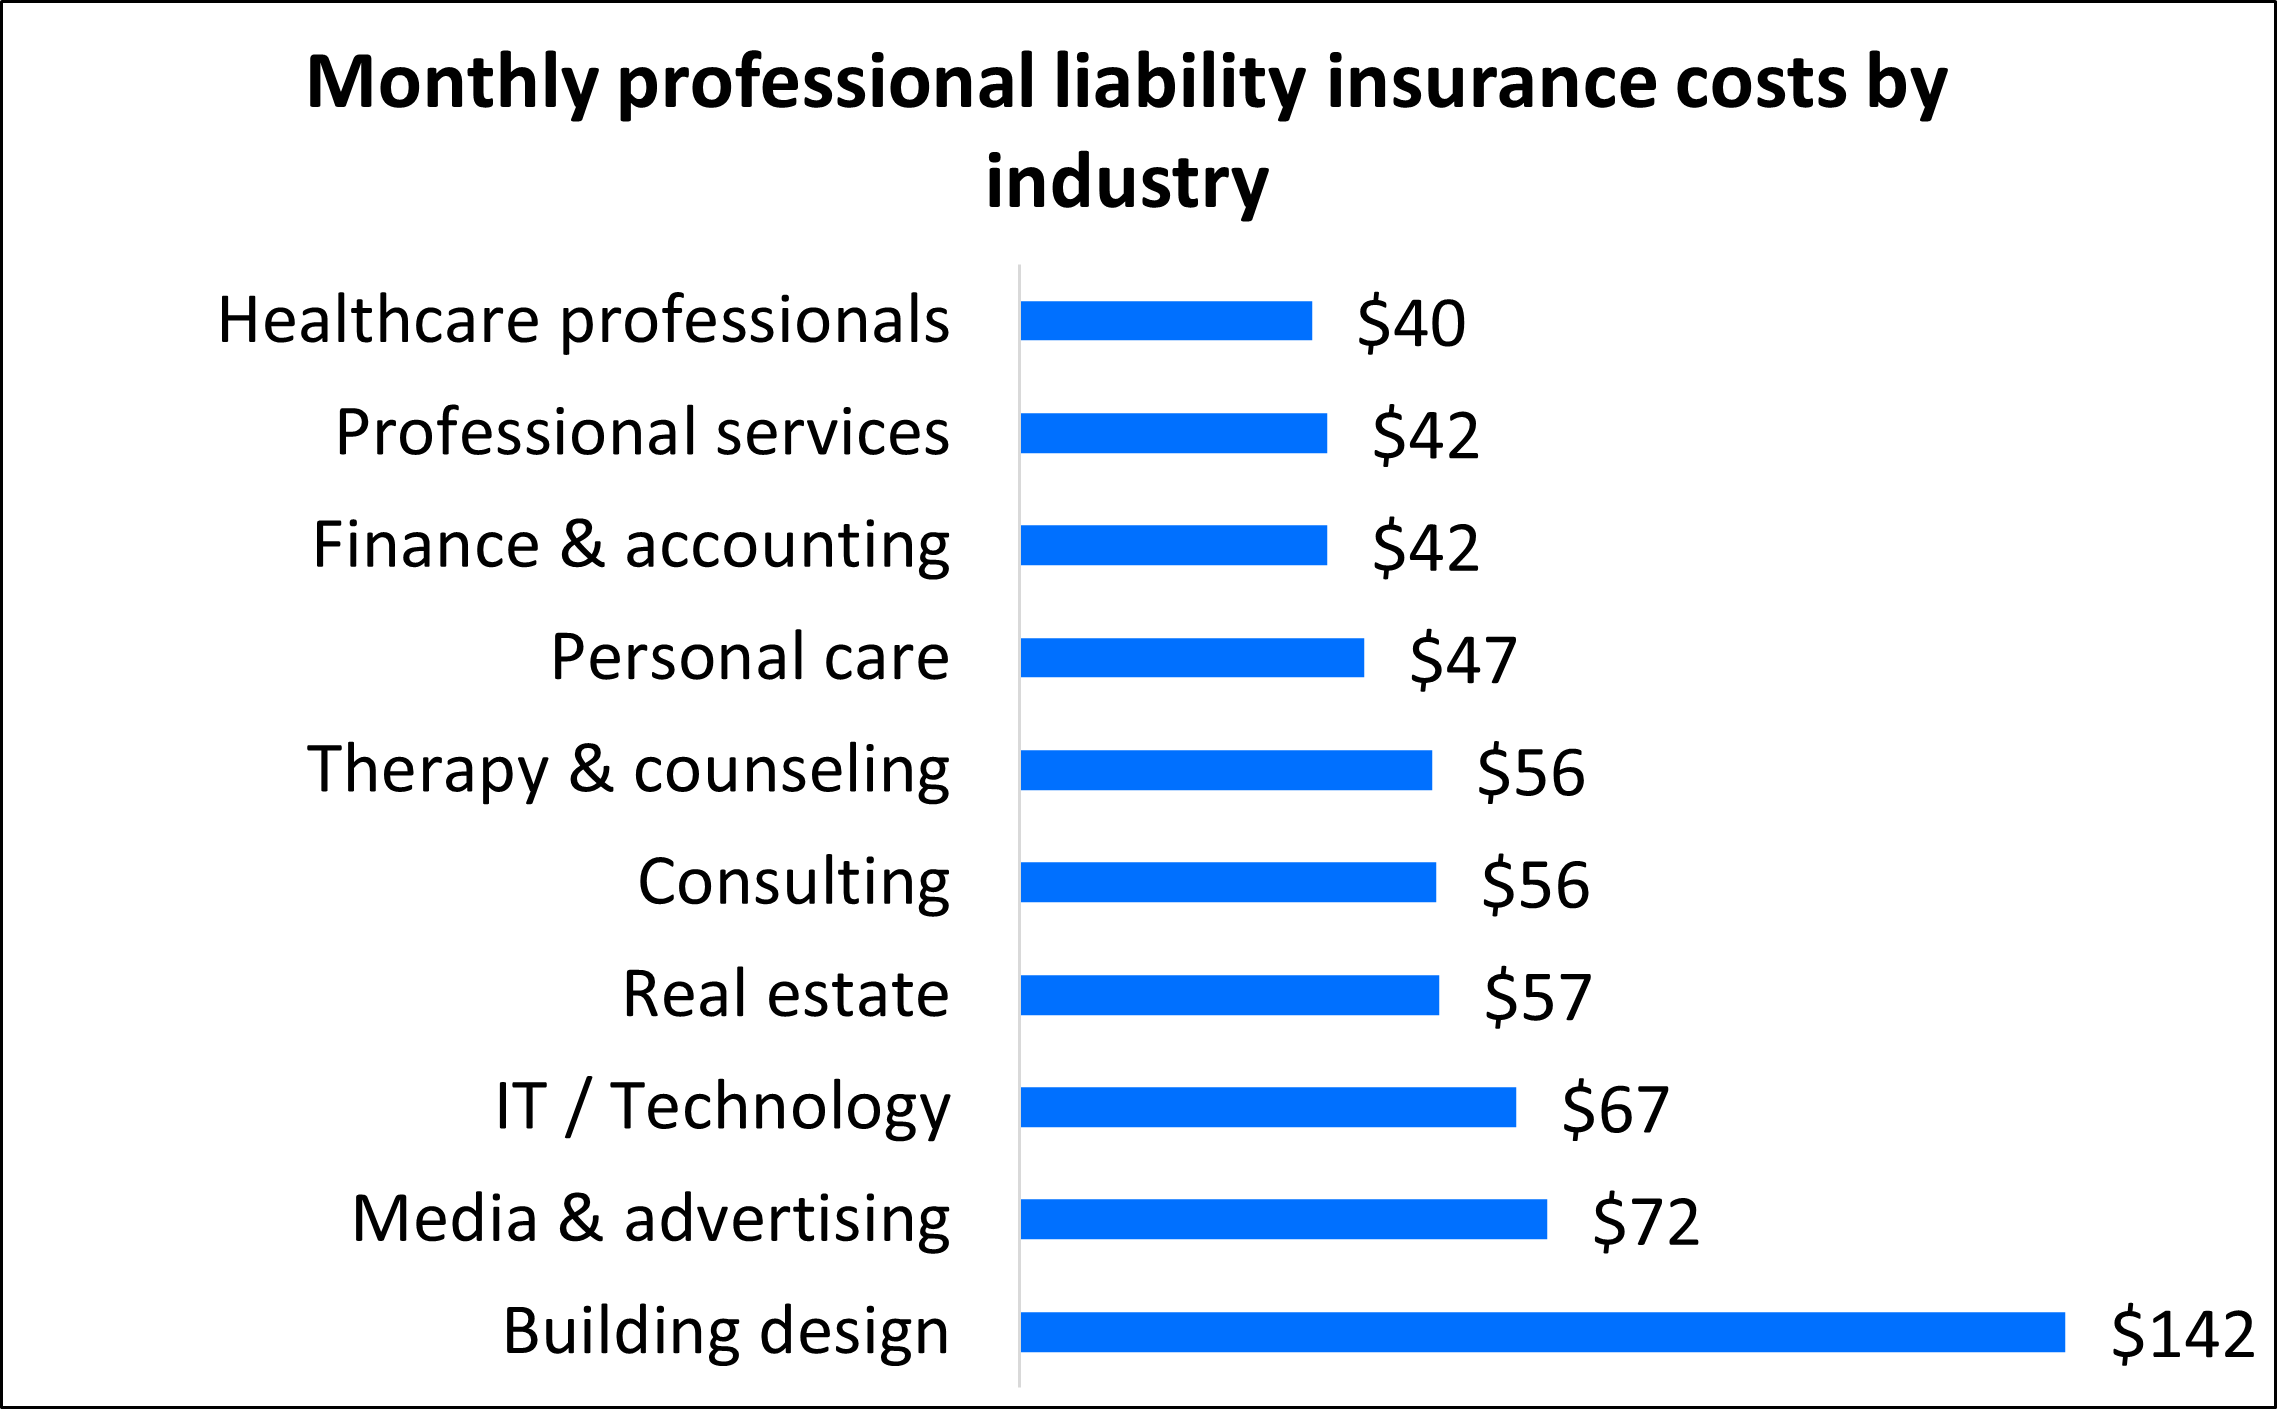 Average professional liability insurance premium for Insureon customers by industry.